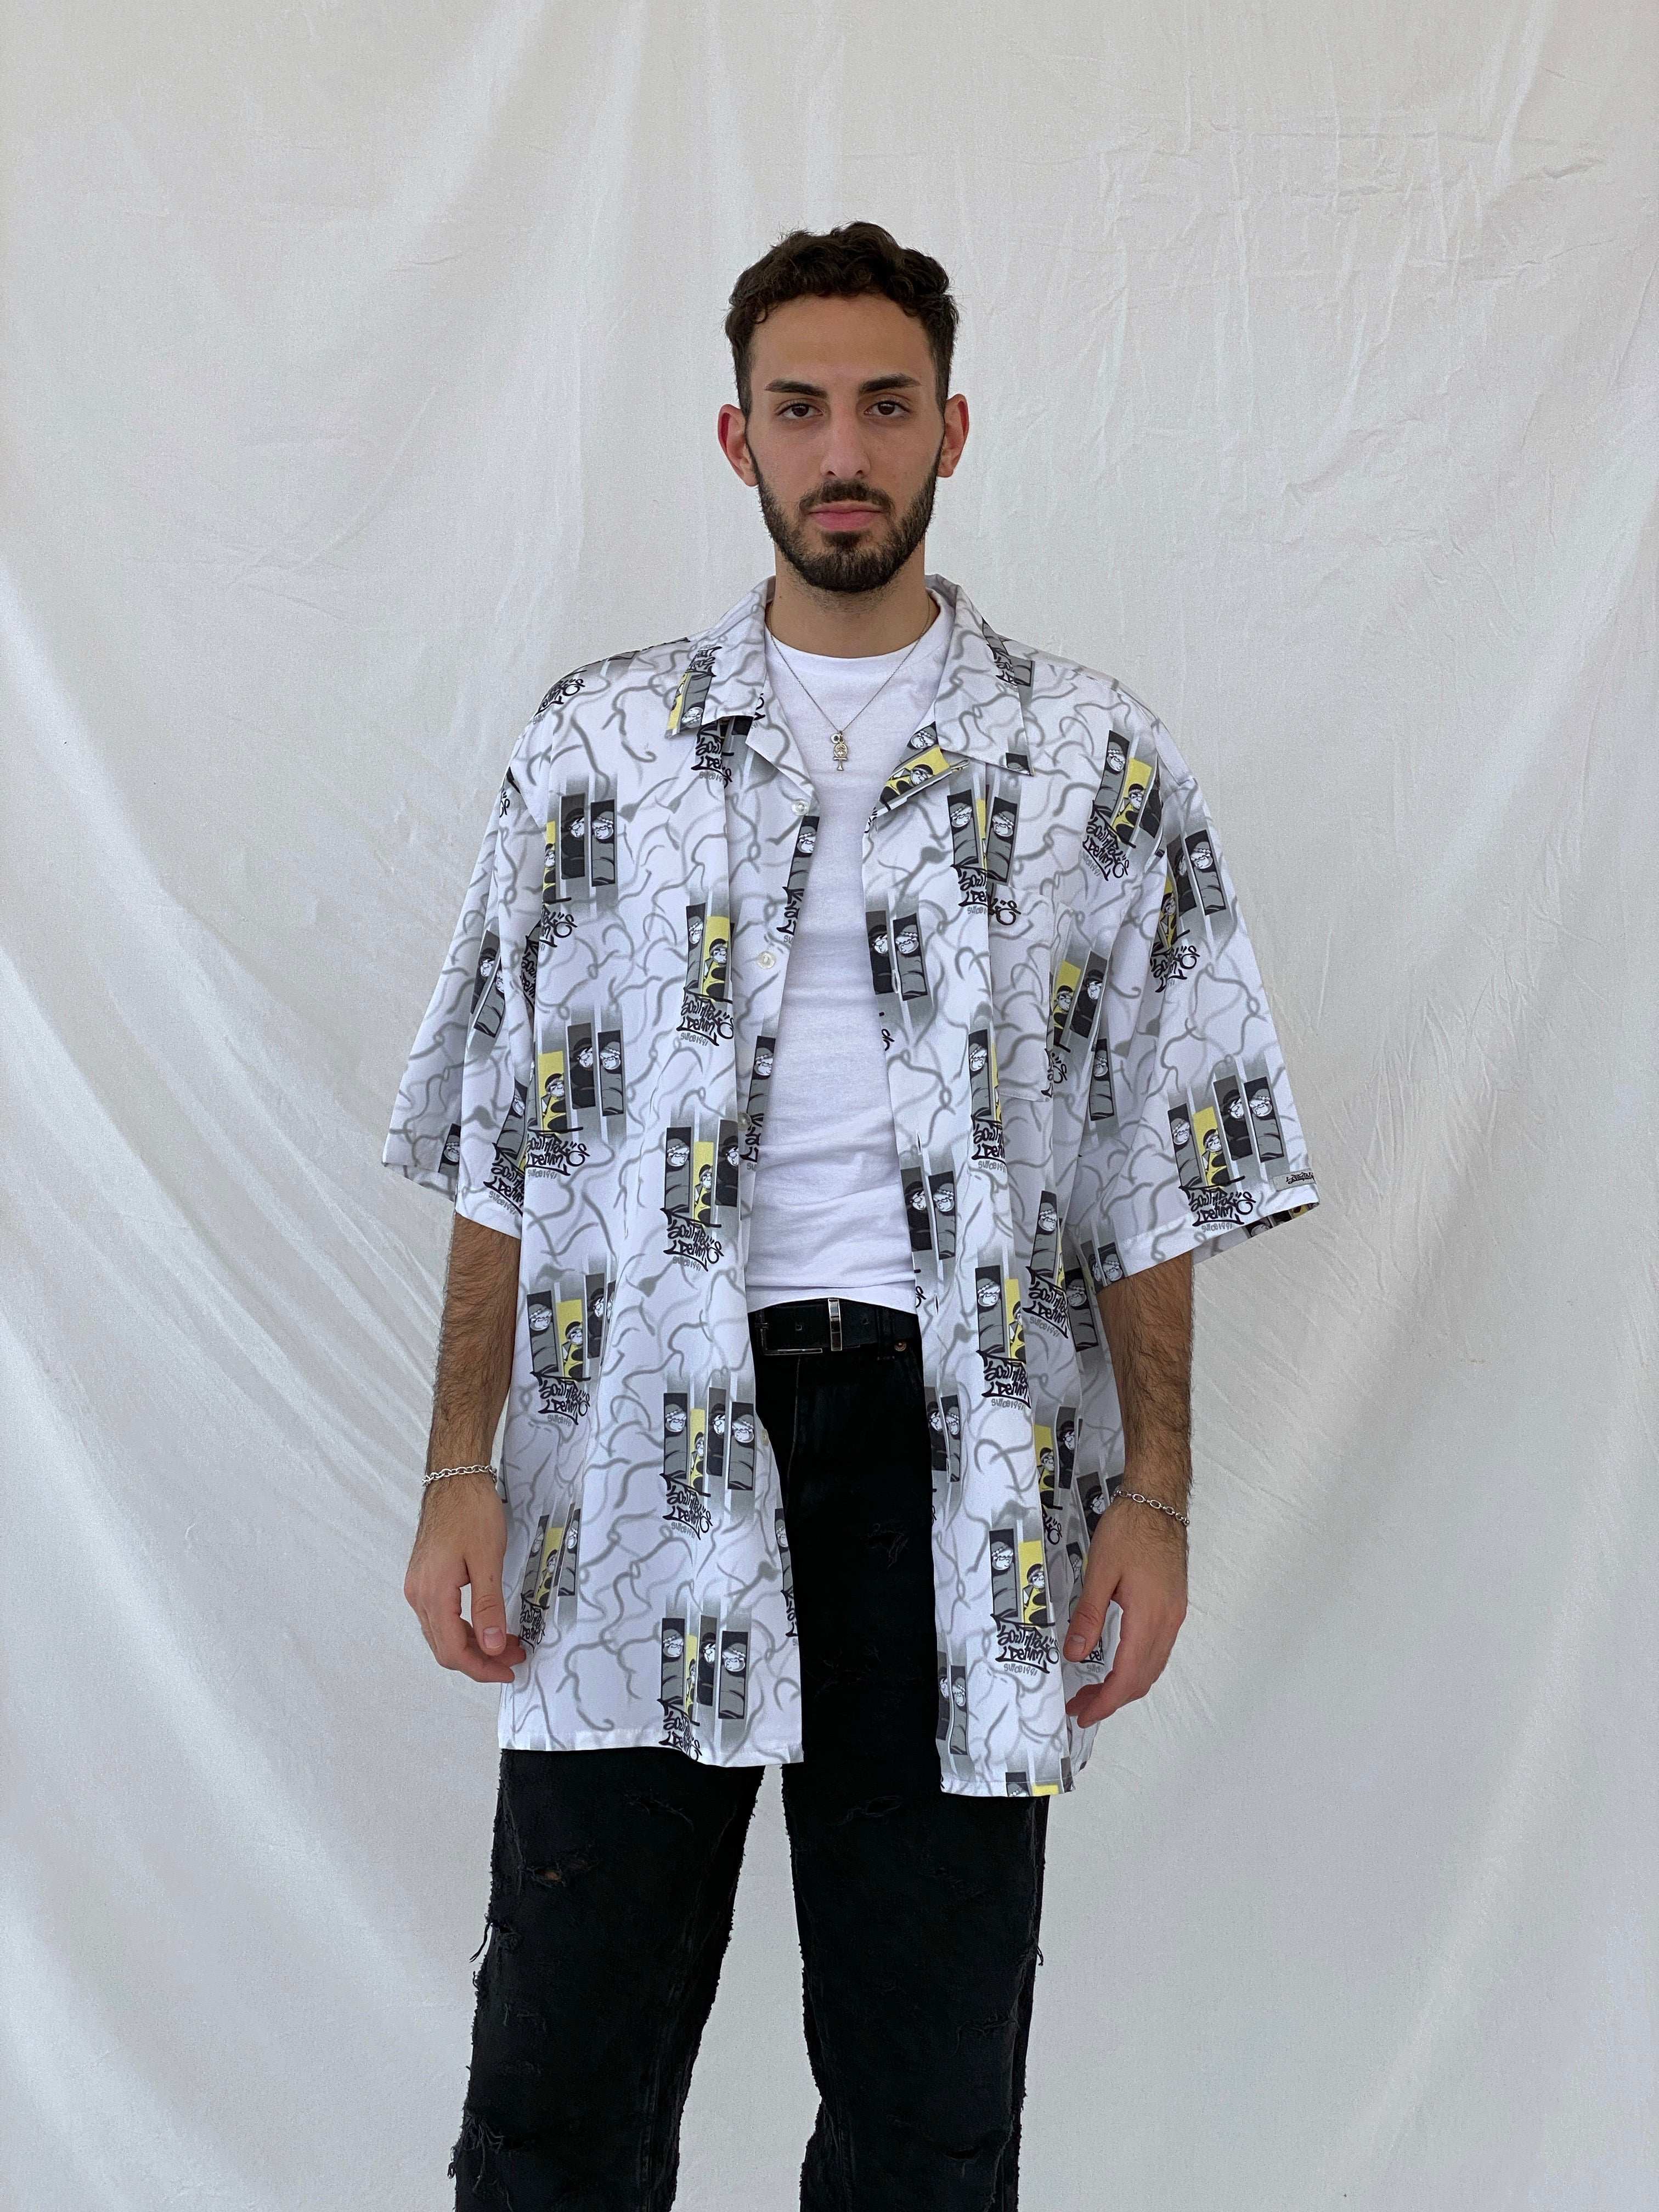 90s/00s South Pole Graphic Oversized HipHop Shirt Size 2XL - Balagan Vintage Half Sleeve Shirt 00s, 90s, Awsam, graphic, half sleeve shirt, NEW IN, printed shirt